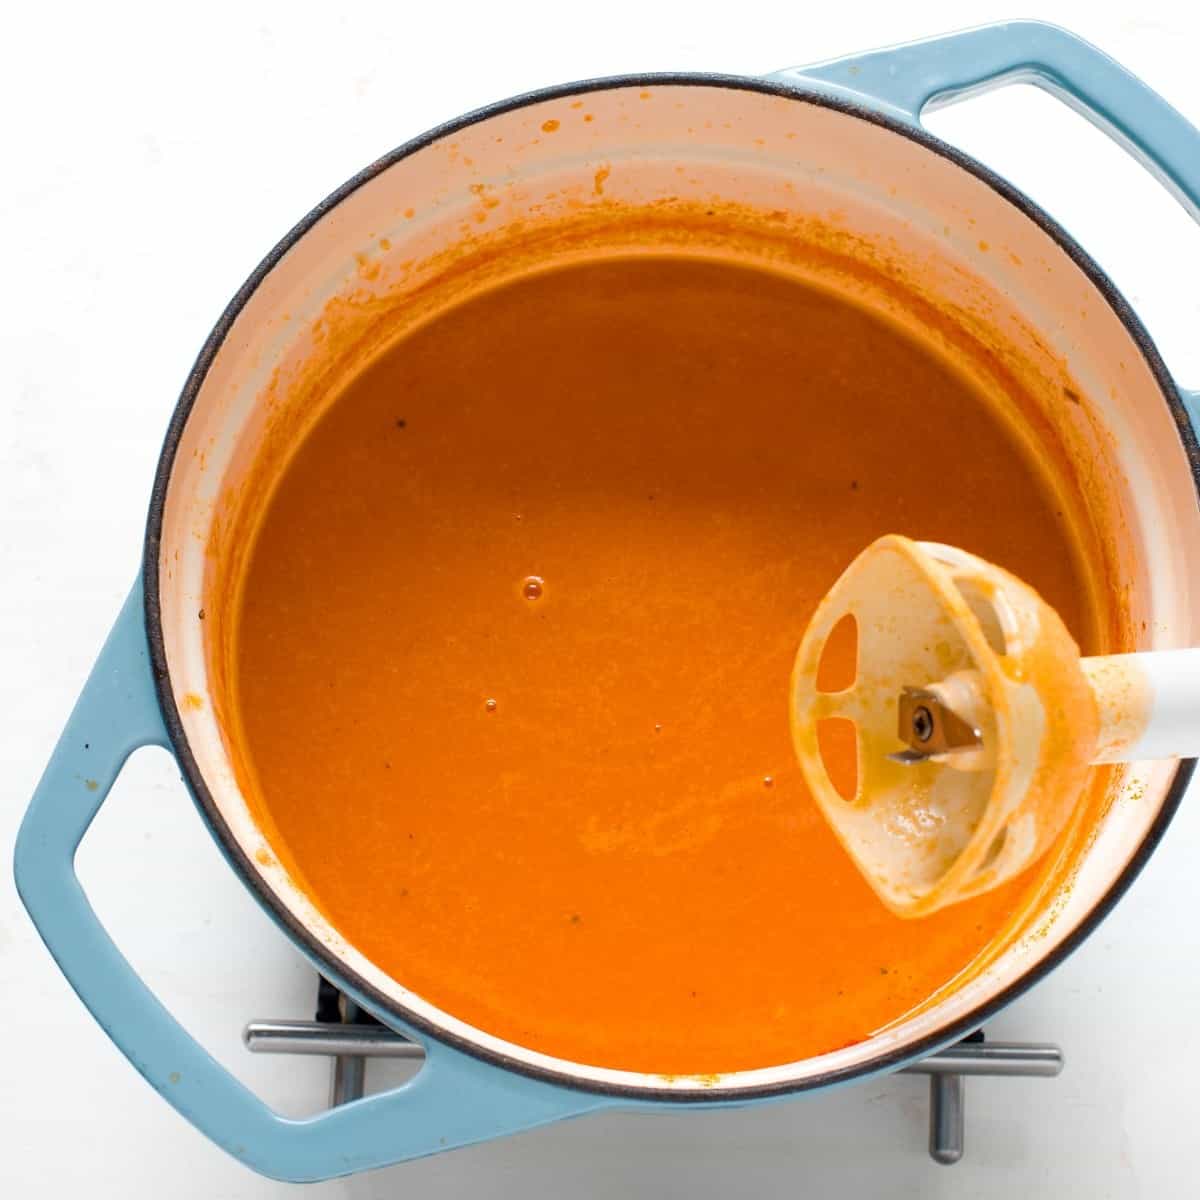 Tomato soup blended with immersion stick blender.